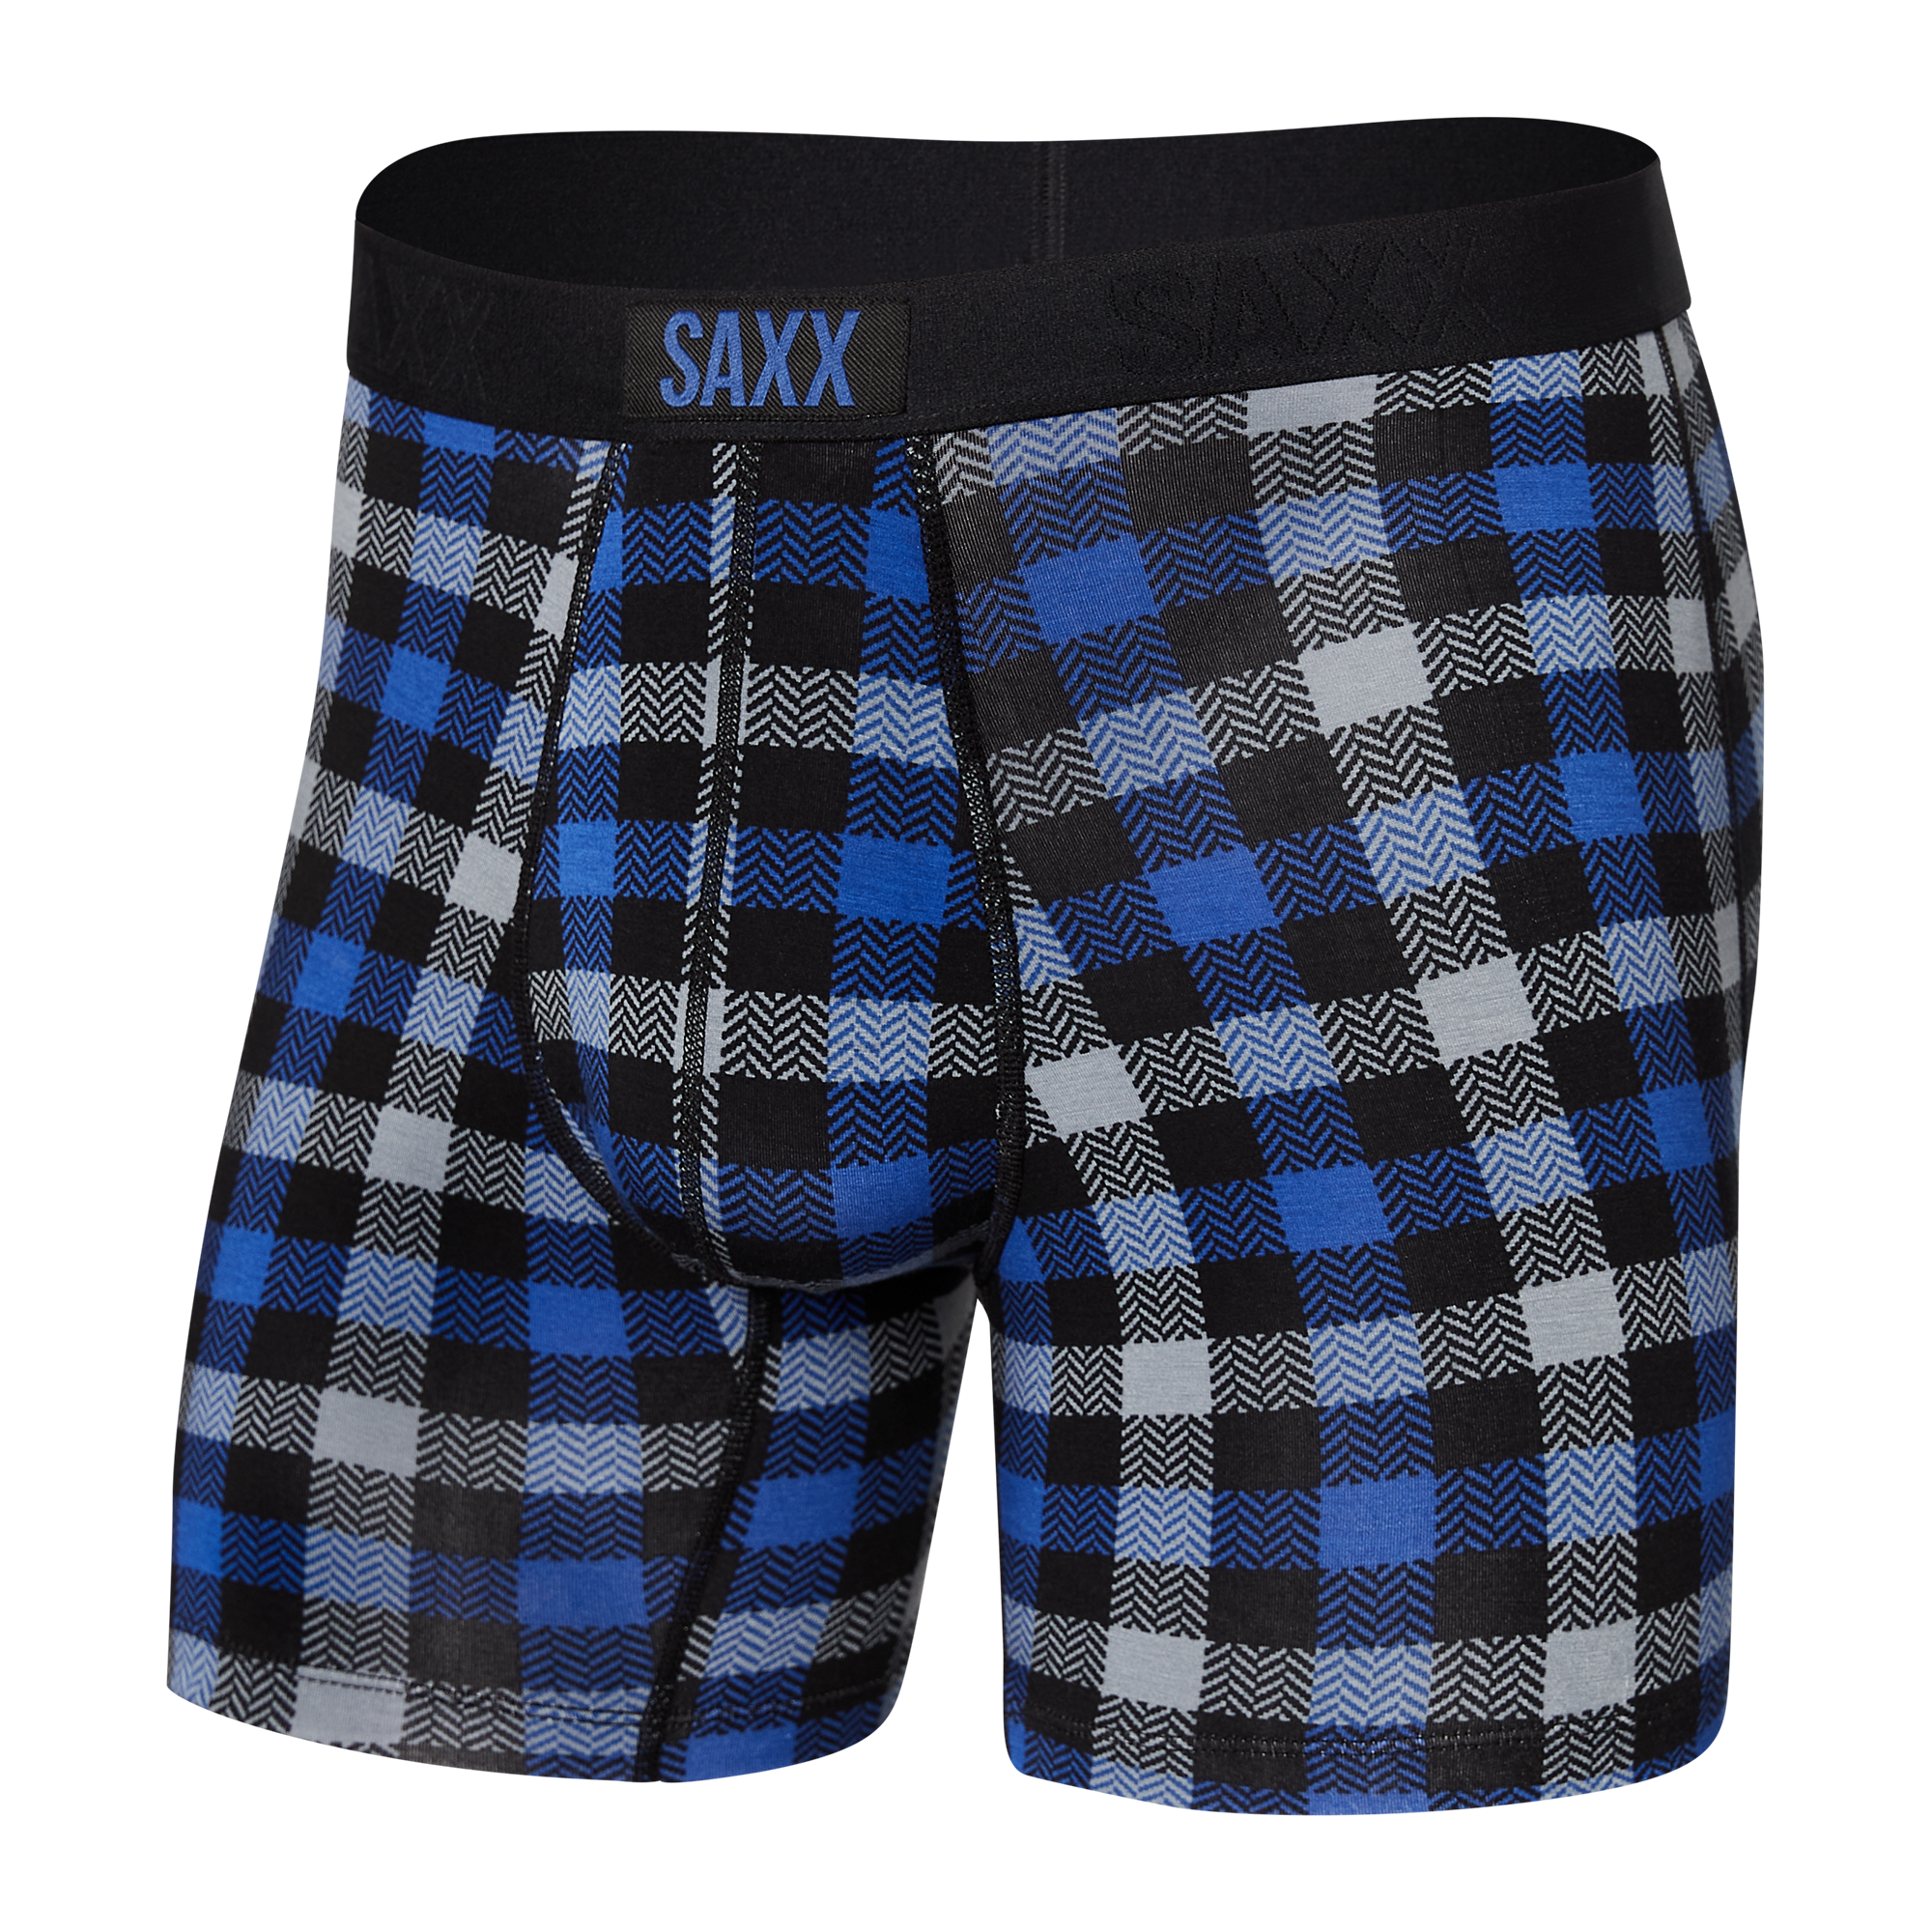 Front of Vibe Boxer Brief in Blue Flannel Check